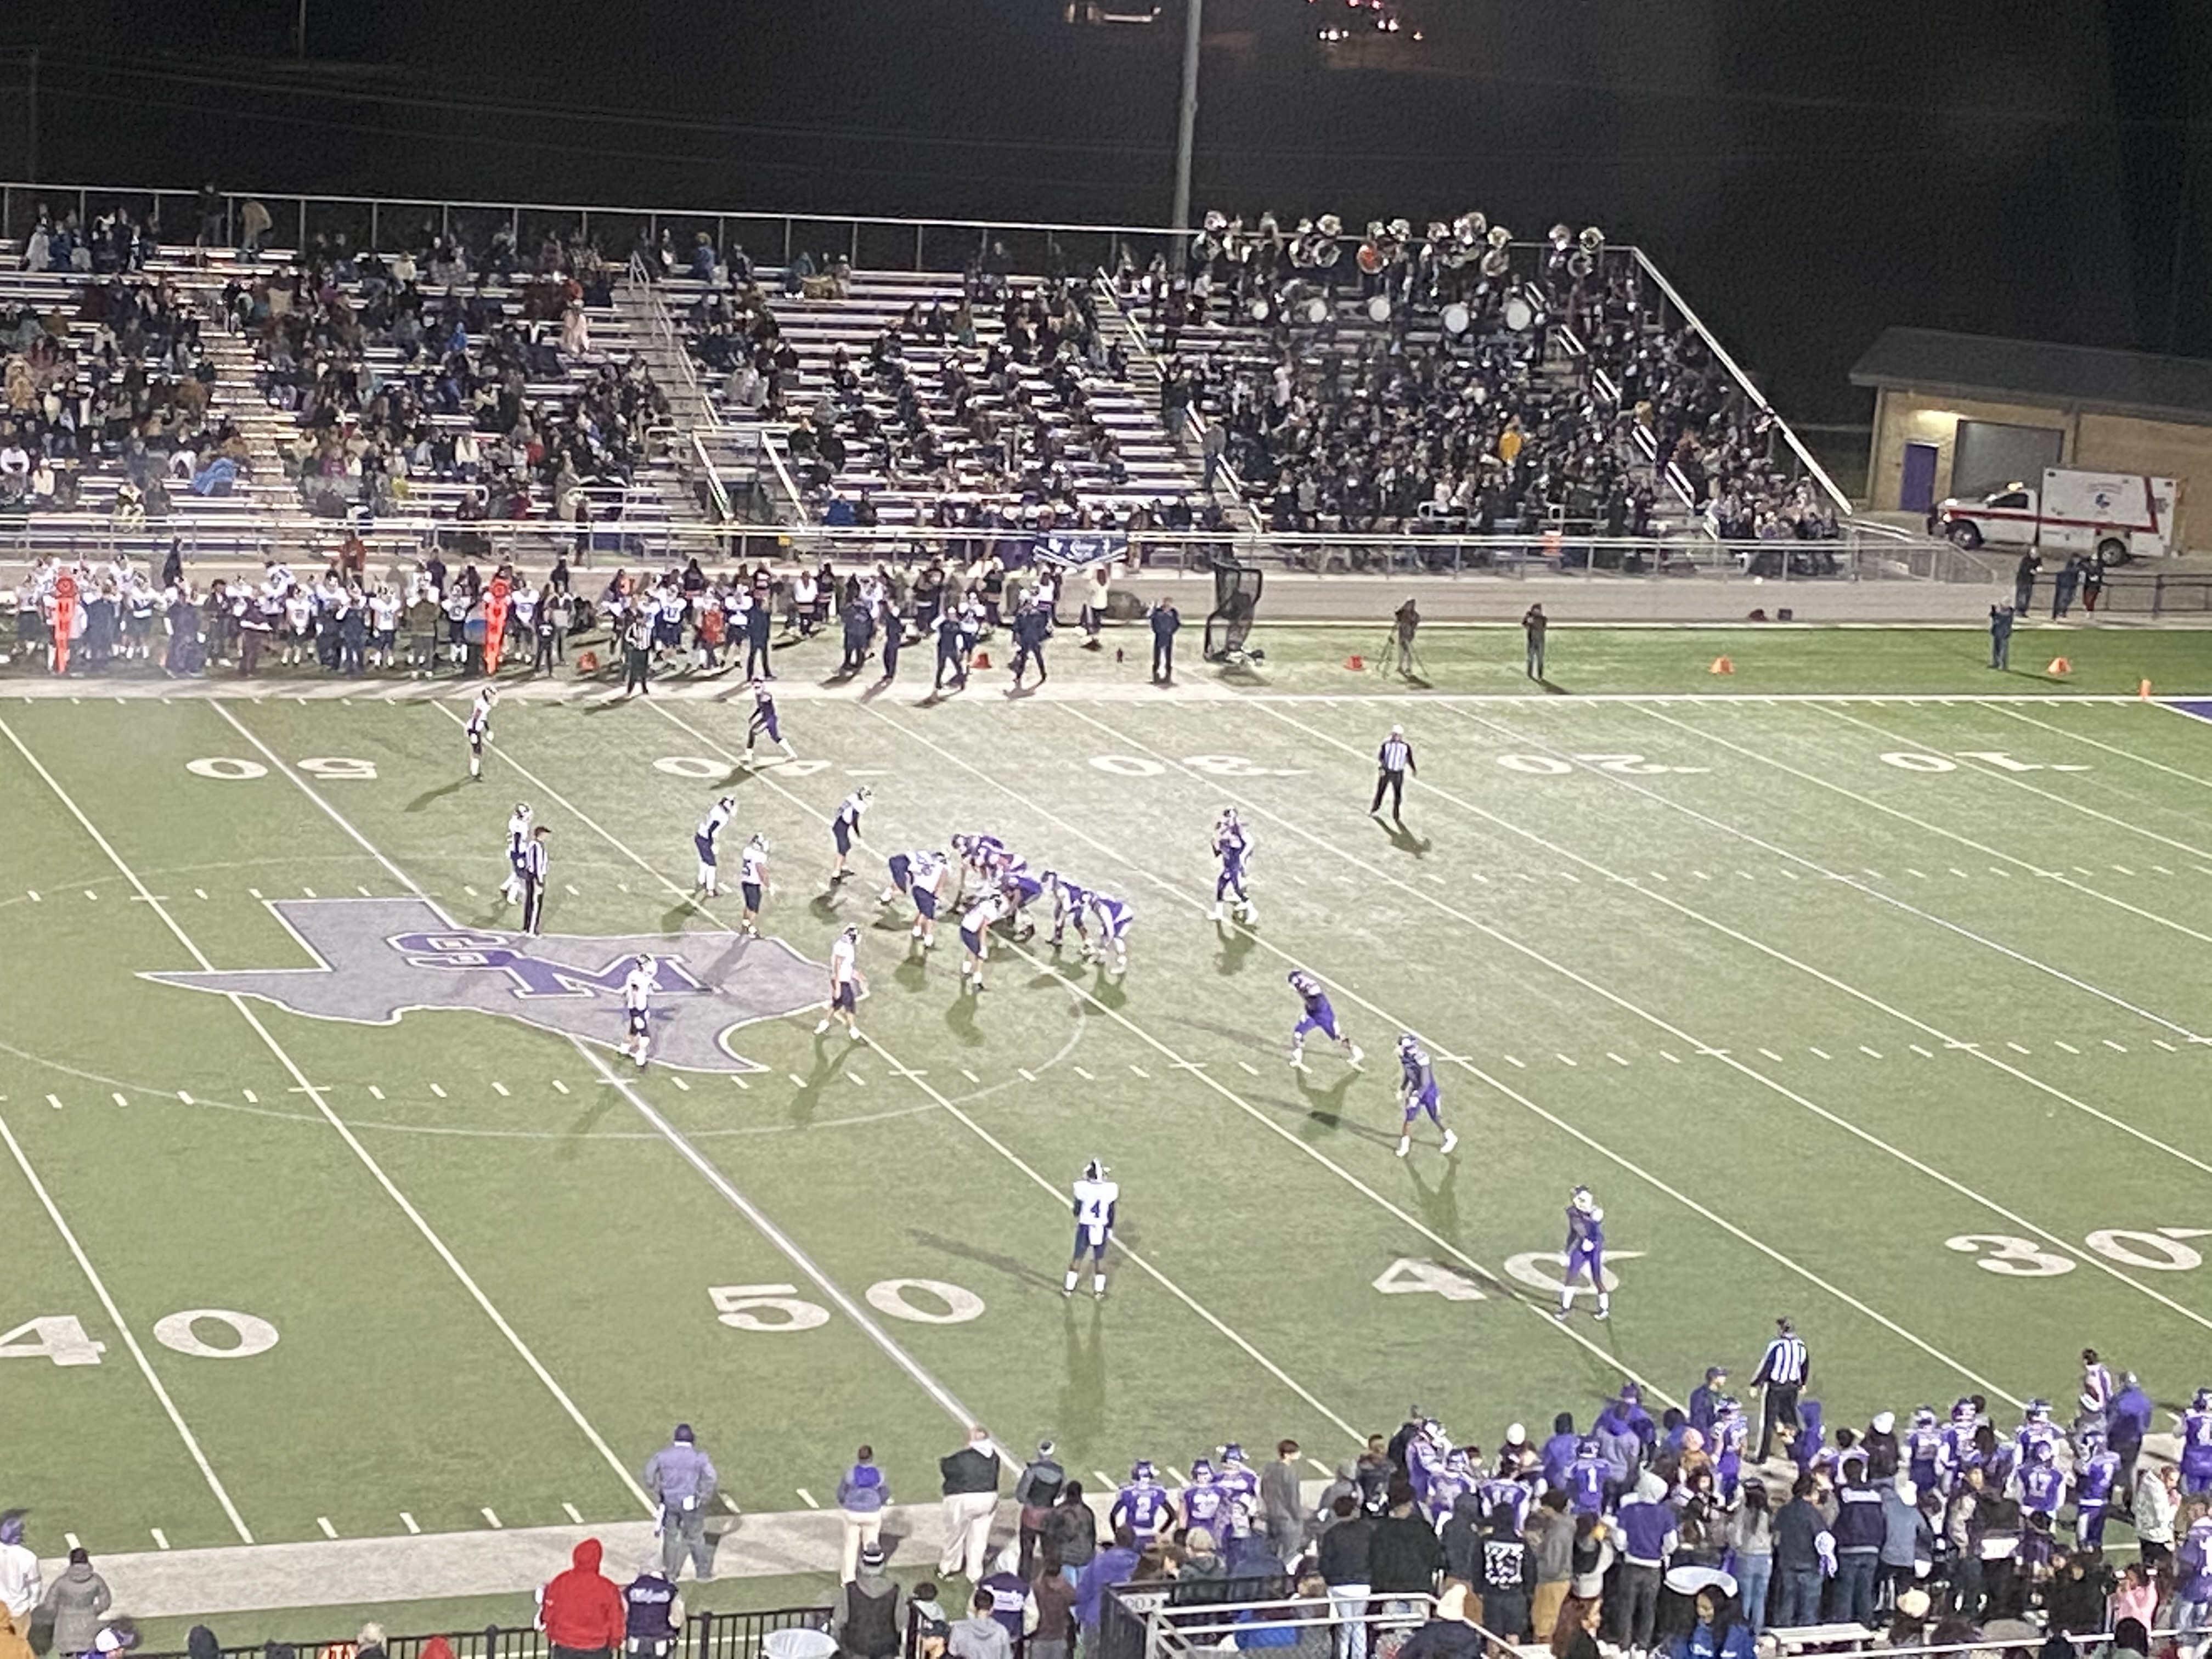 San Marcos is on offense running a play against the Smithson Valley defense